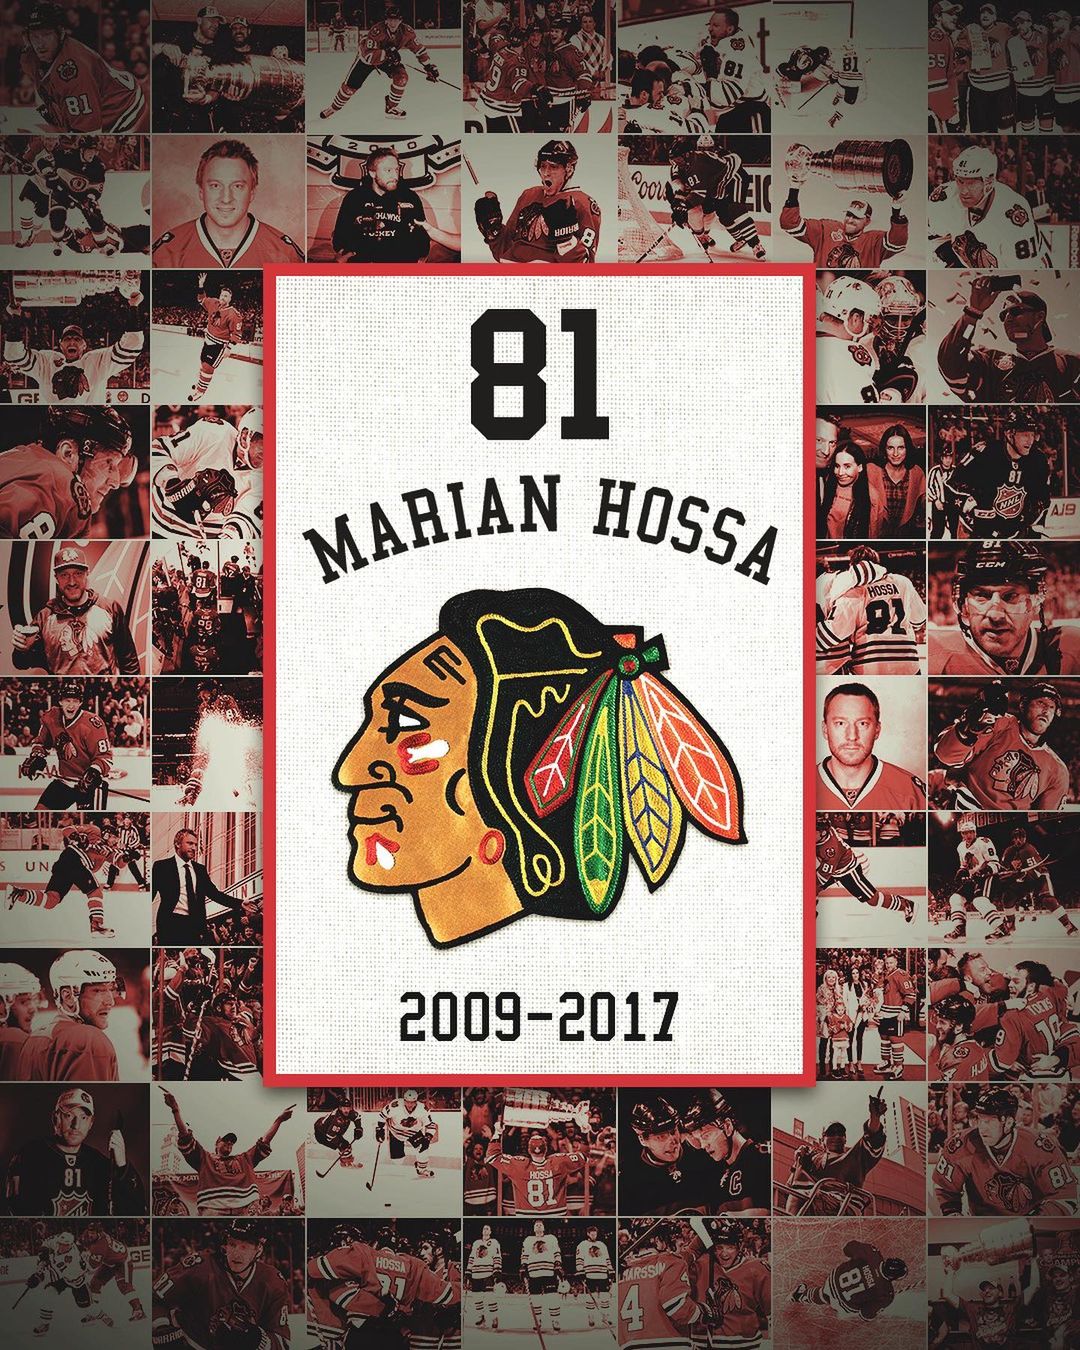 We’re sending Hossa to the rafters ...